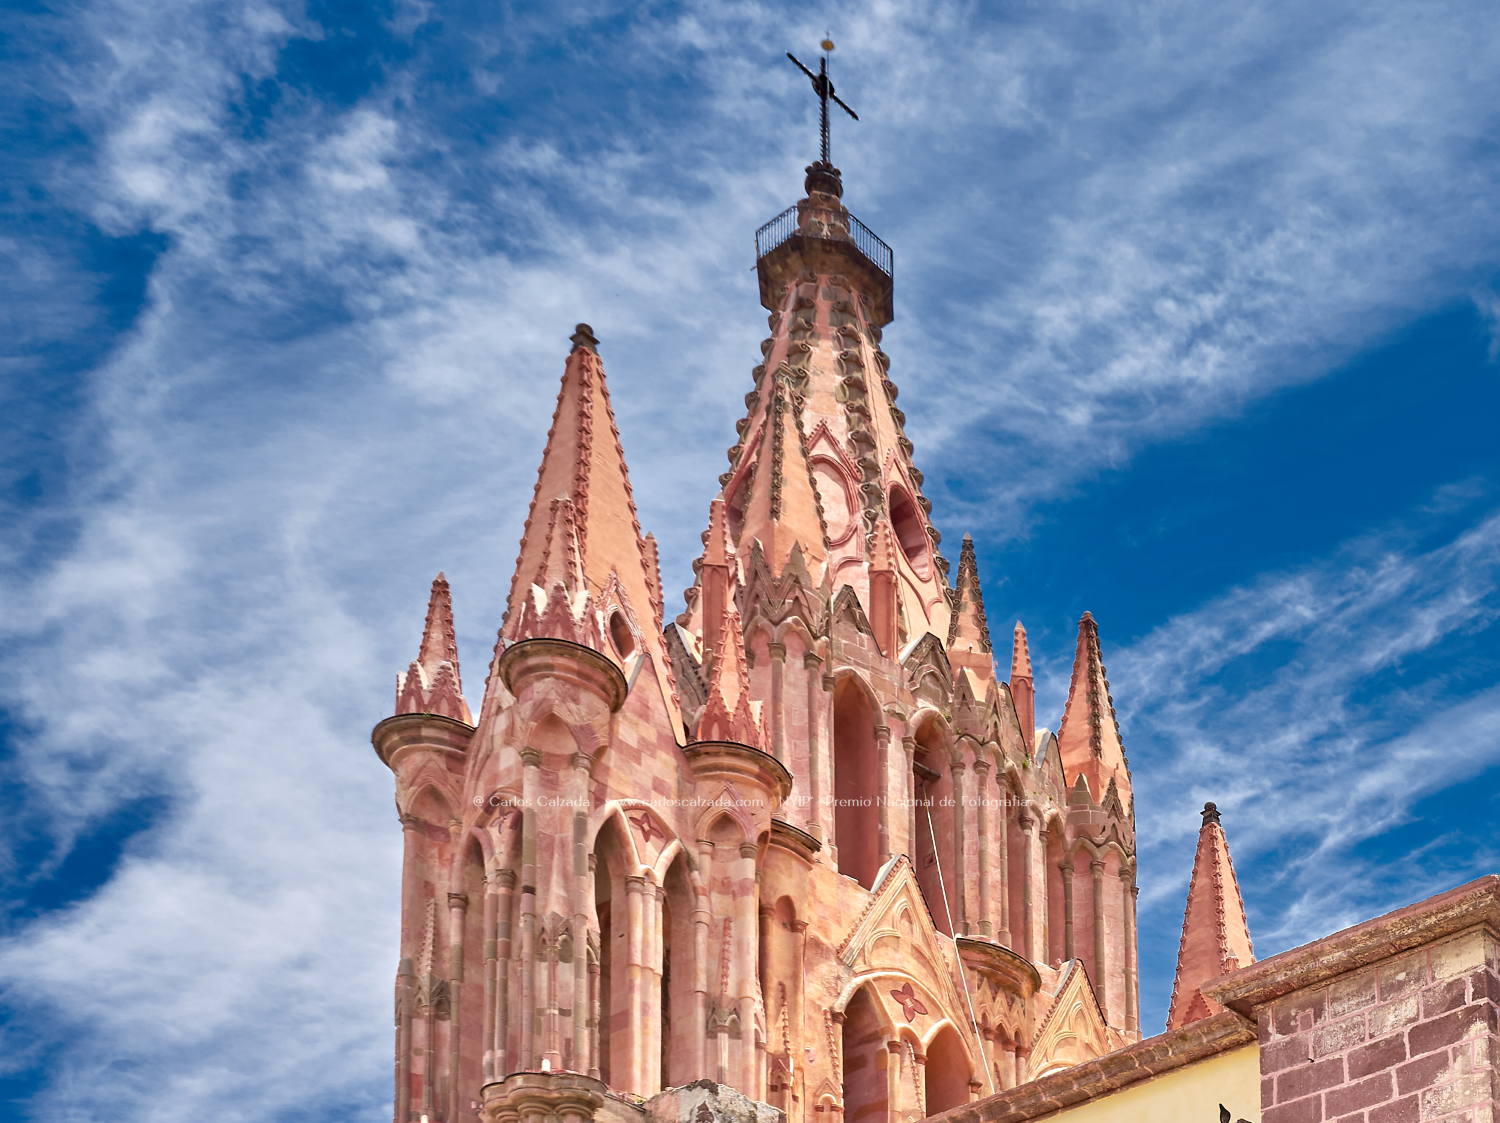 San Miguel Allende - may. 01 2016 - DSC01598.png